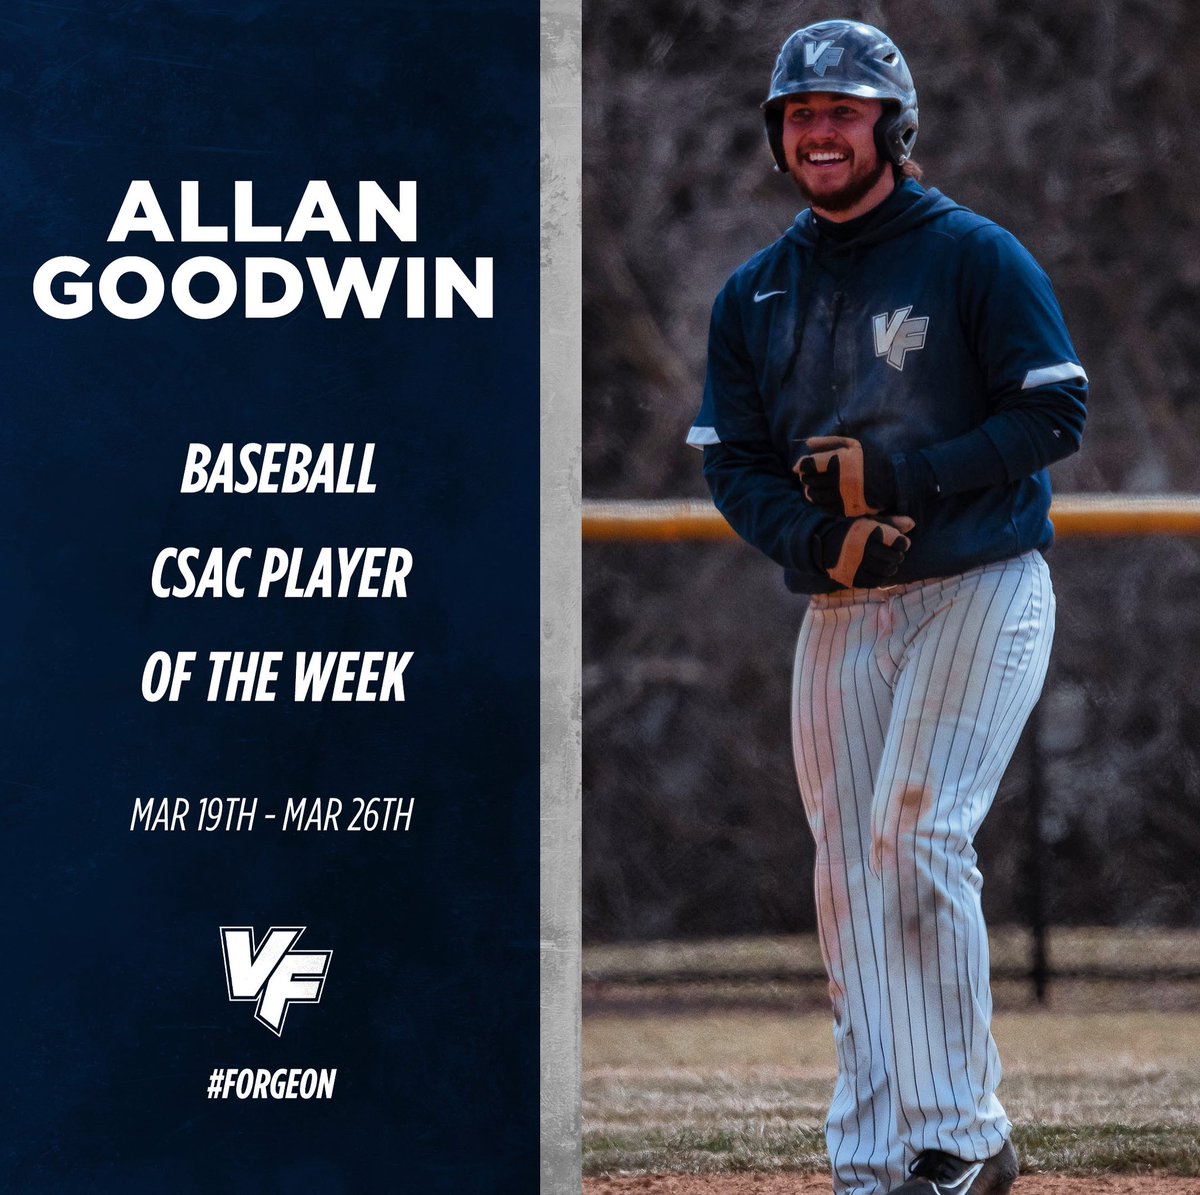 Allan Goodwin won his 2nd CSAC Player of the Week recognition for 2023! Goodwin posted a .500 Batting Average (8-for-16) hitting 2 home runs (both Grand Slams), scored 5 Runs, 1 2B, 1 SB, and finished the week with 10 RBI in a conference sweep over Clarks Summit #ForgeOn⚒️